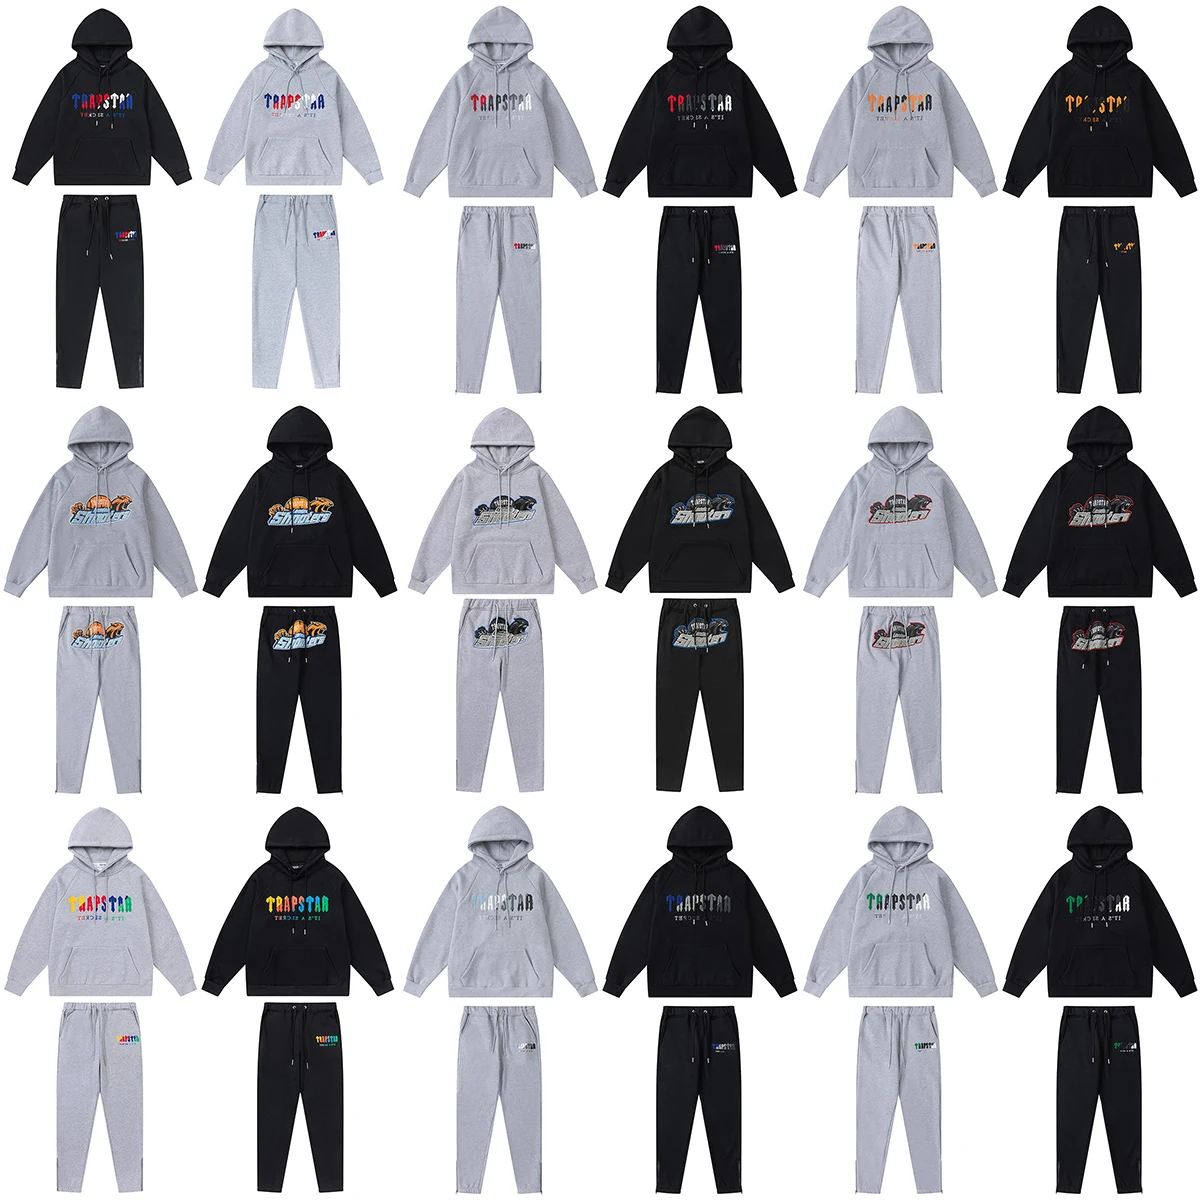 New Trapstar London Sweater Suit Hoodies Embroidered Shooters Sweatshirt Trousers Sportswear Streetwear Pullover Casual Clothes